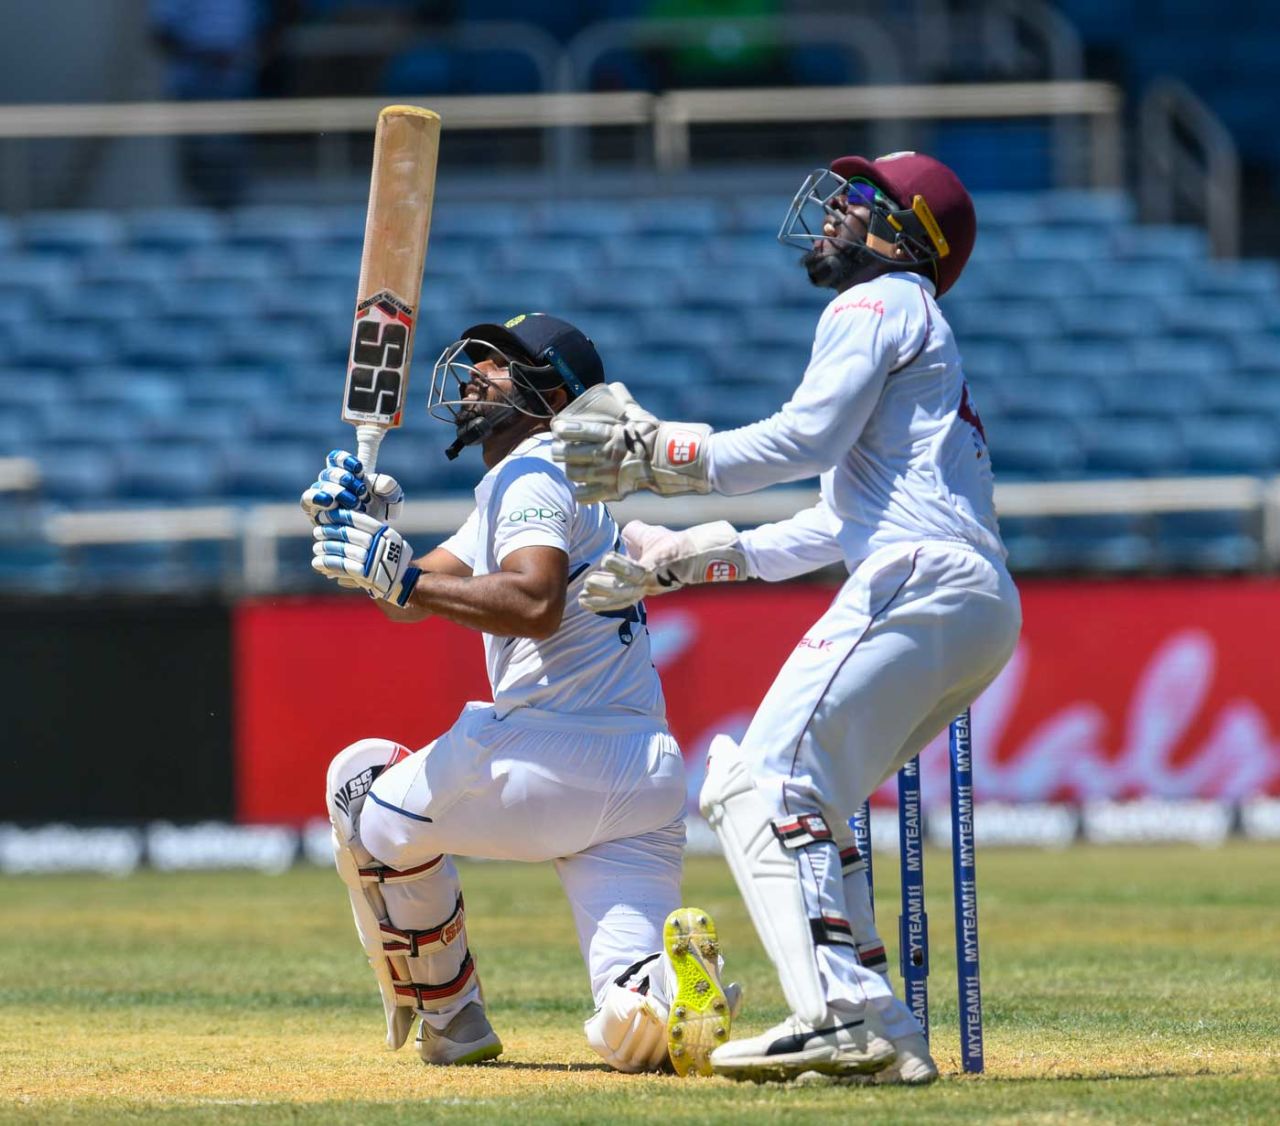 Hanuma Vihari looks skywards after getting a top edge, West Indies v India, 2nd Test, Kingston, 1st day, August 31, 2019